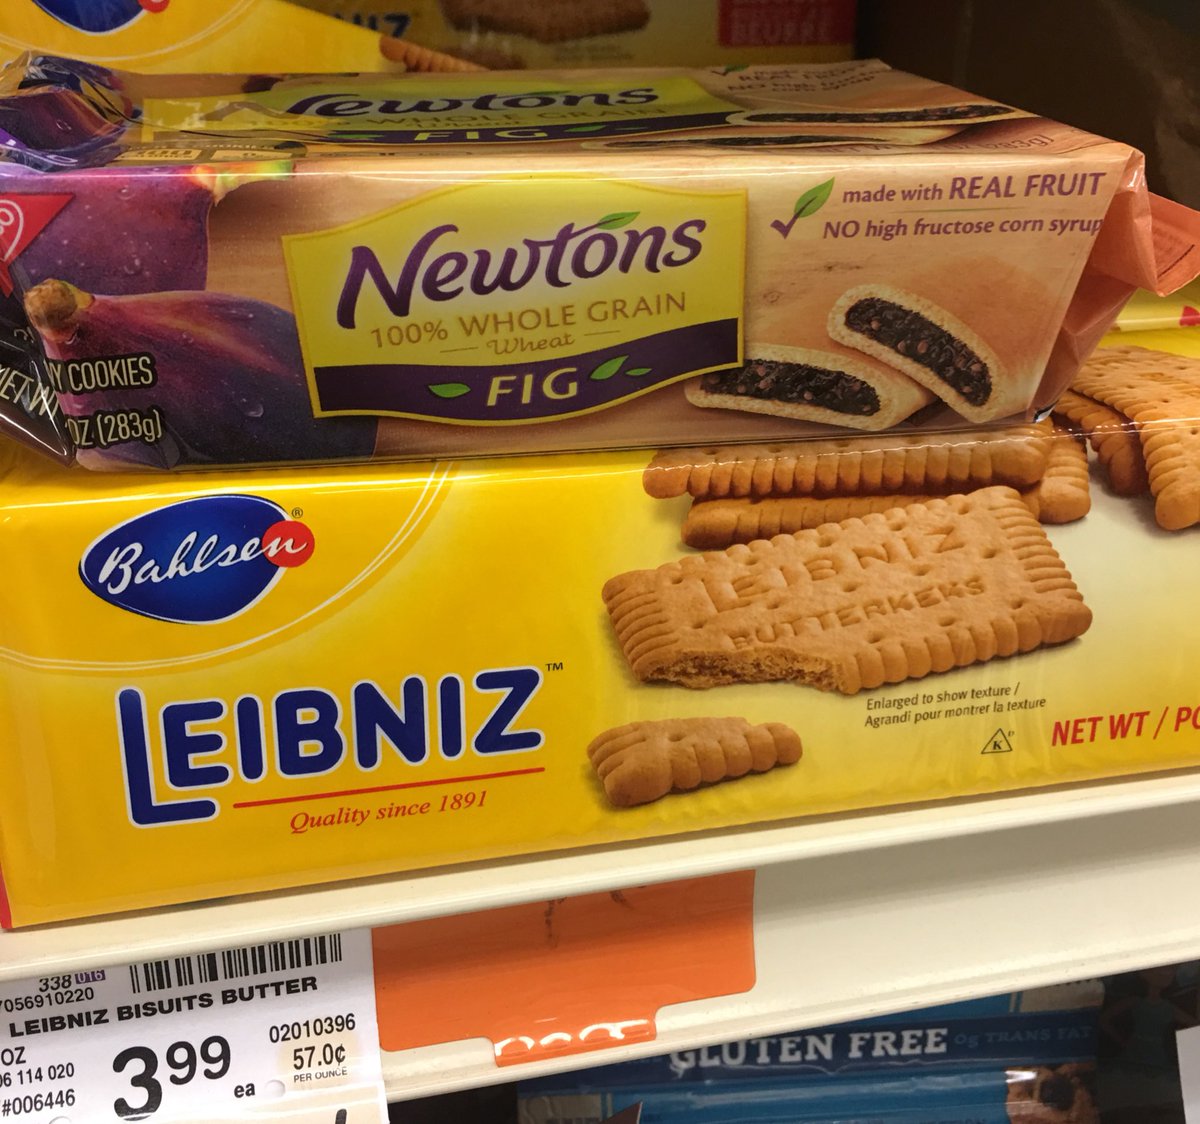 The battle over who invented calculus is taken to grocery store. @mathhistory